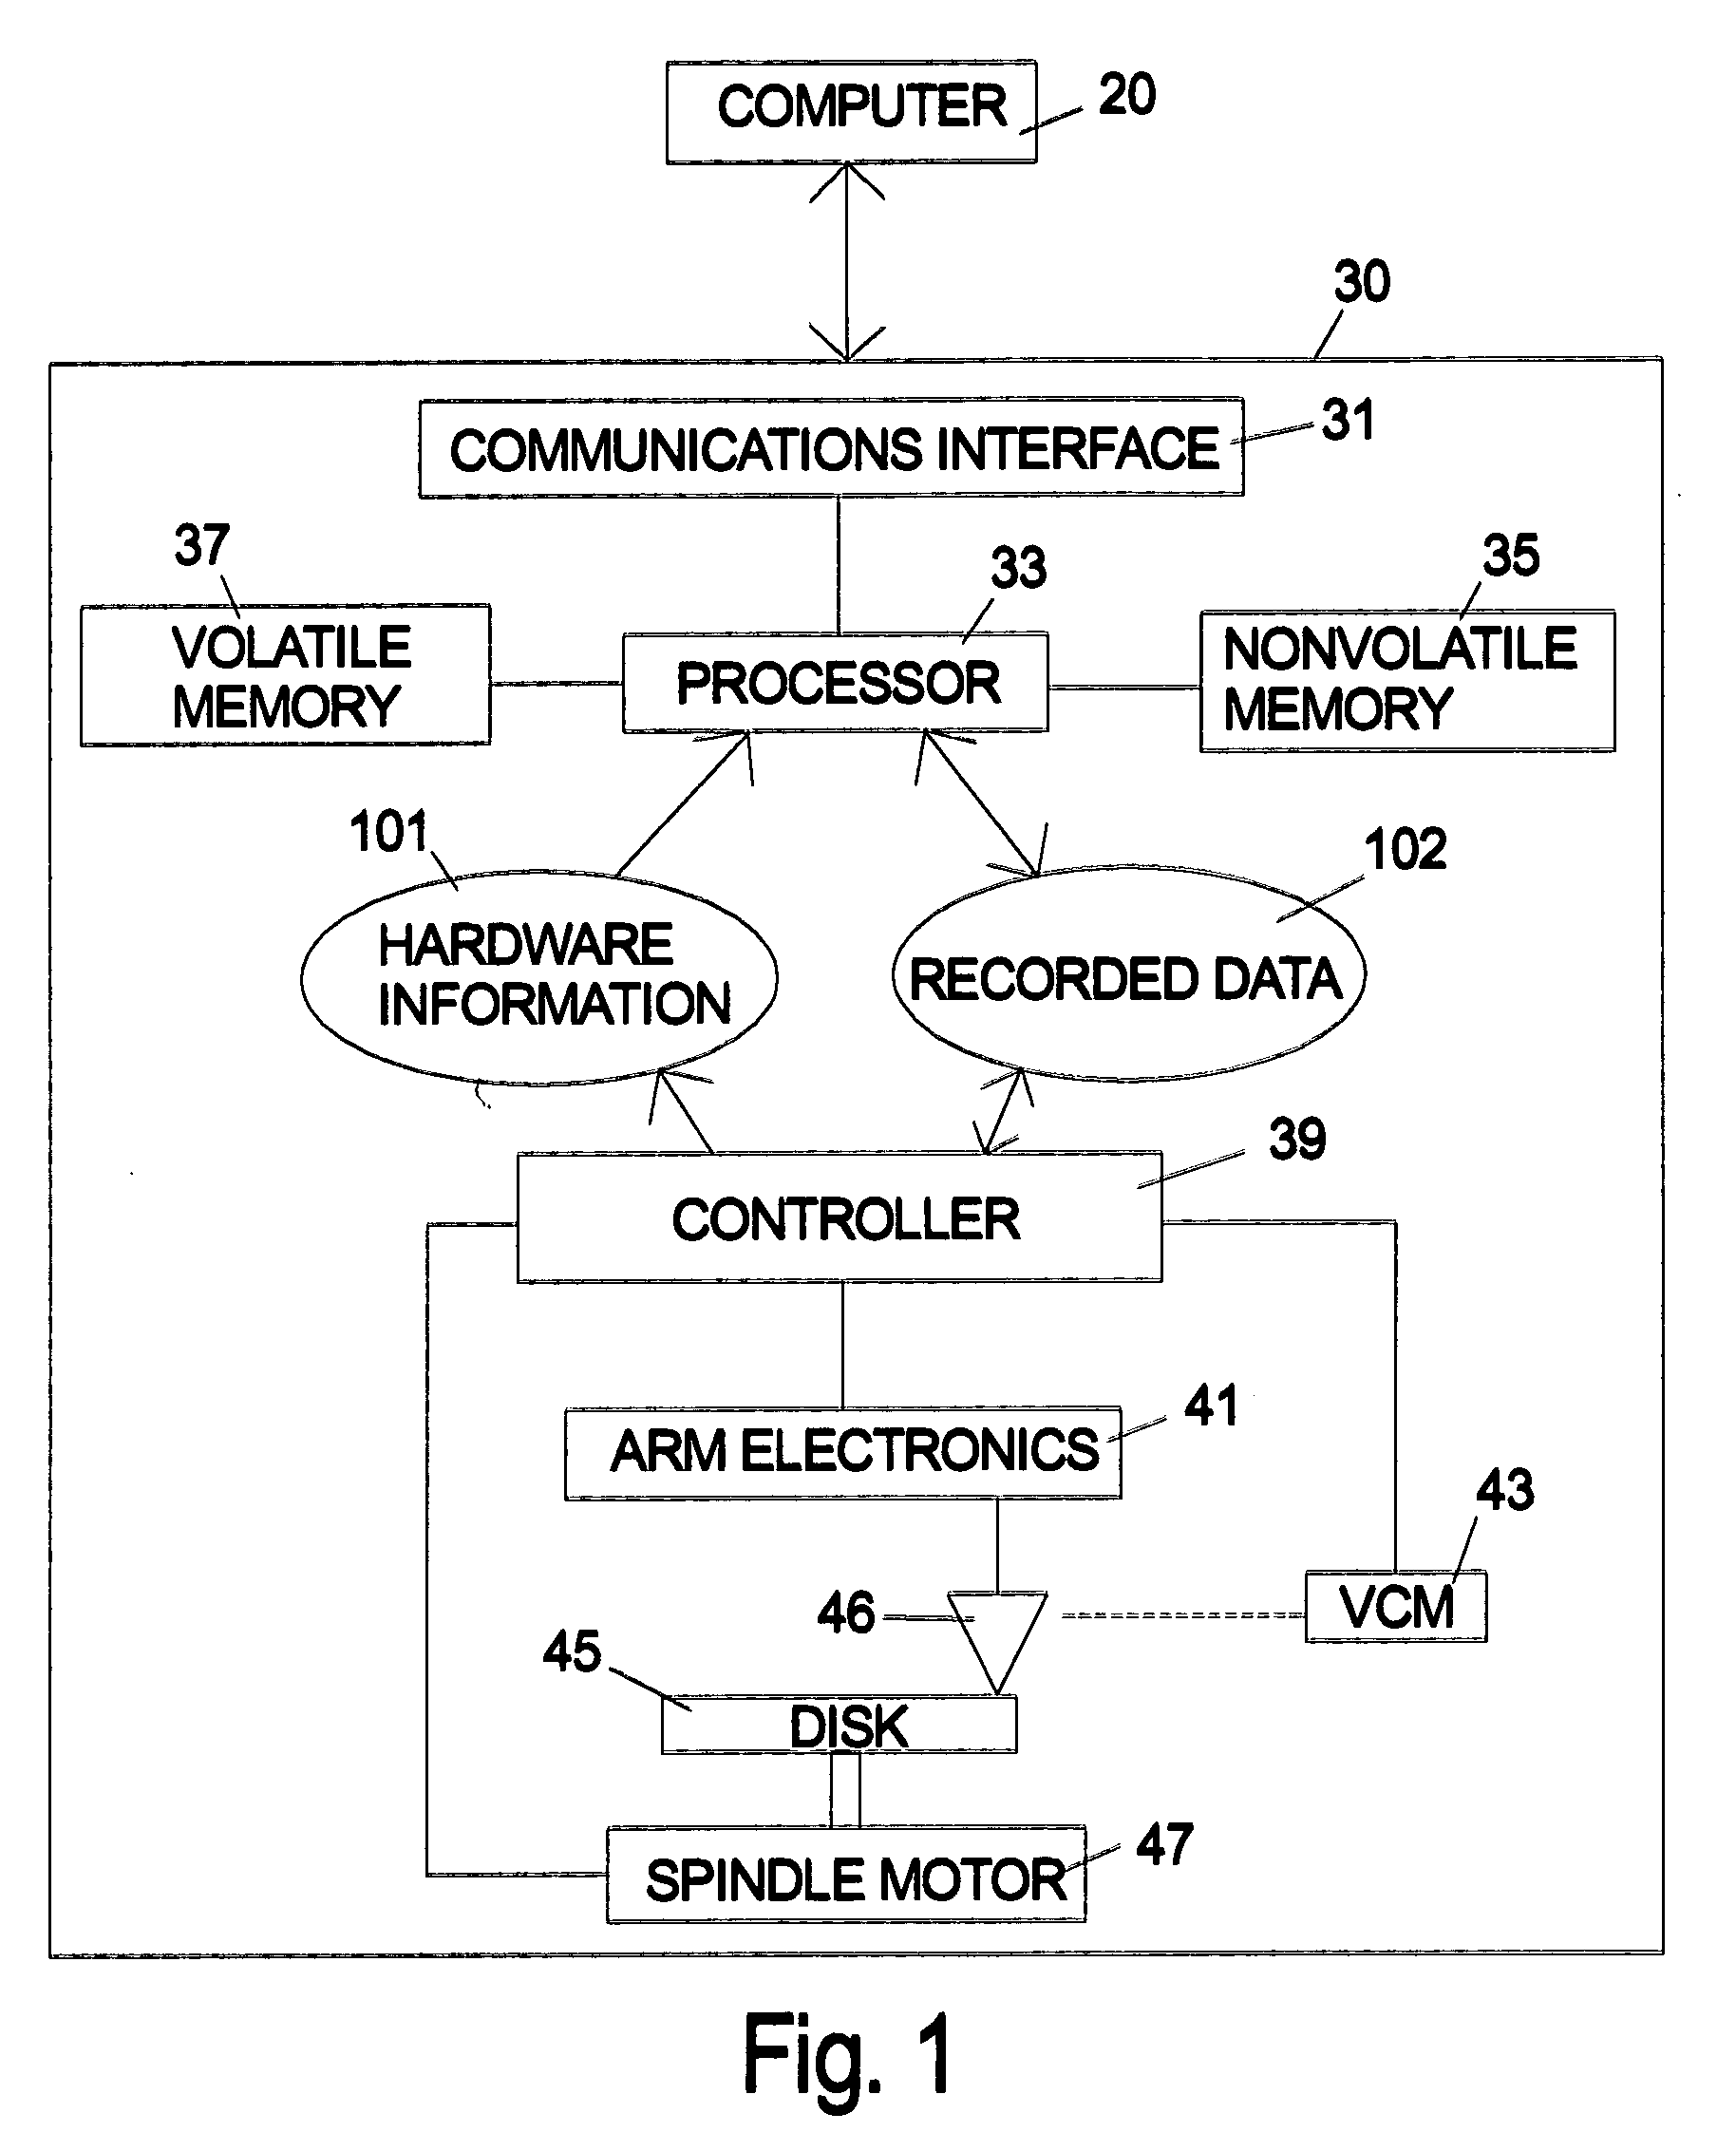 Disk drive/CPU architecture for distributed computing